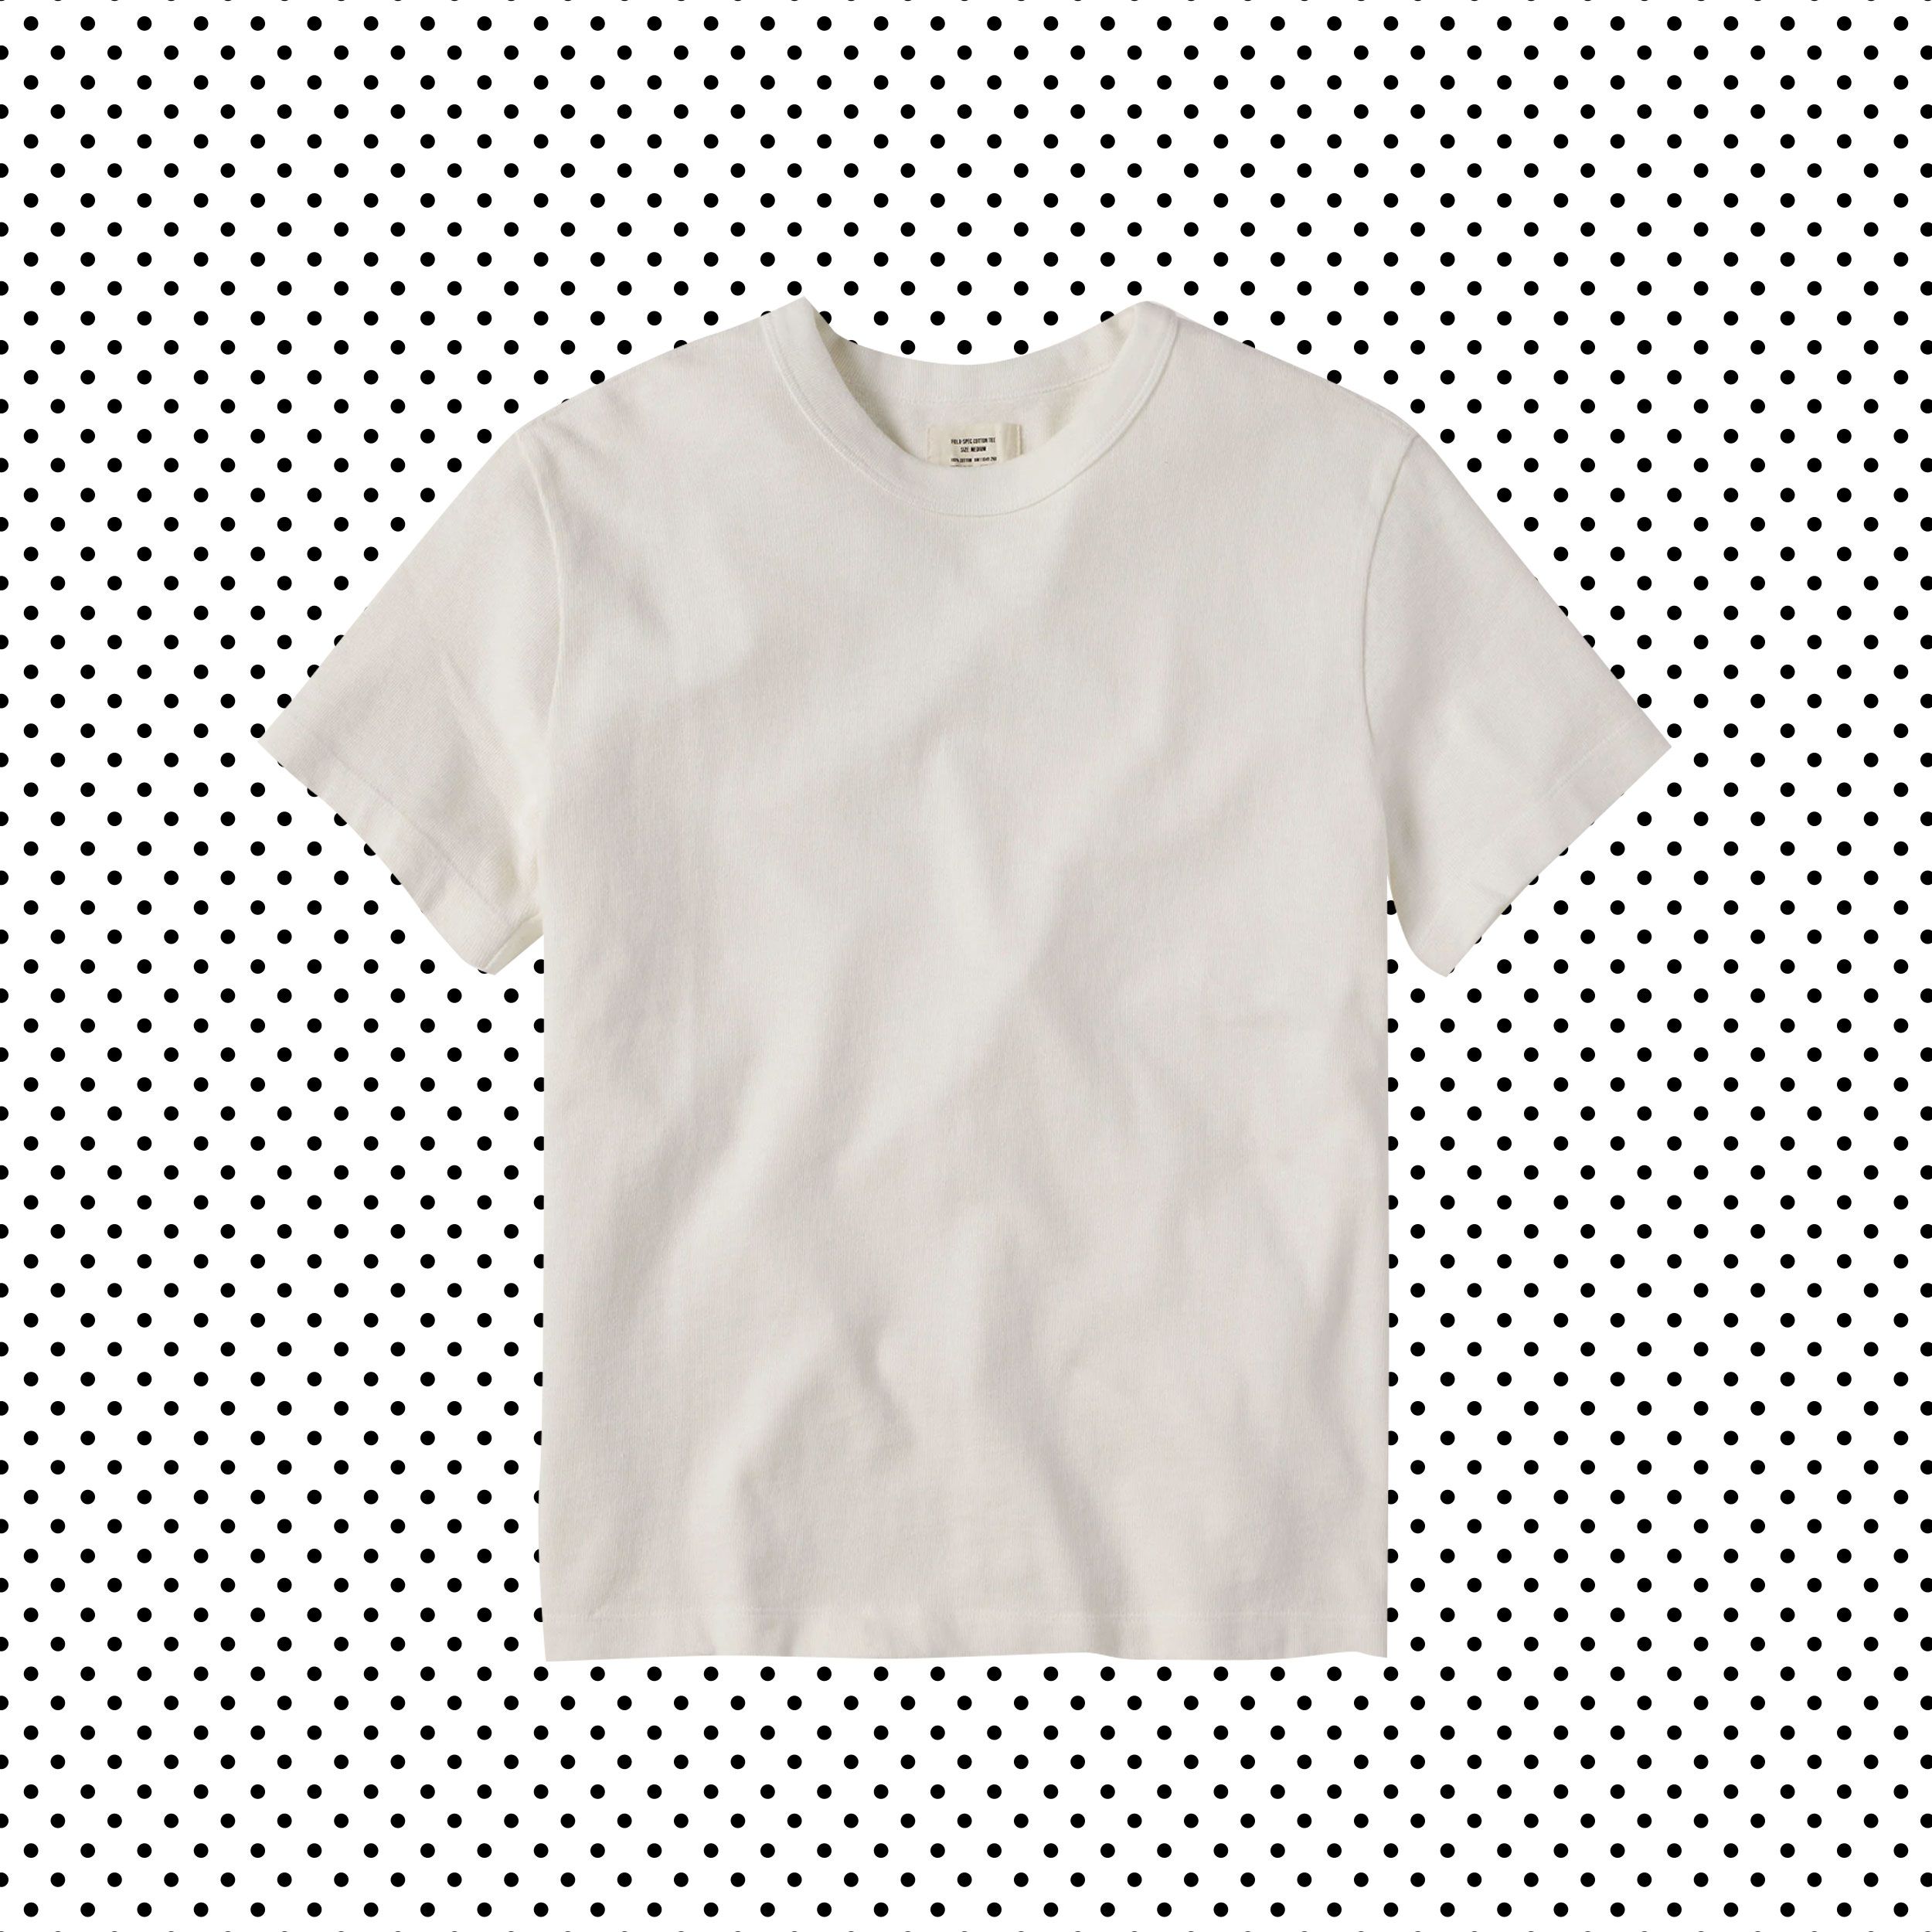 The Best Men's White T-Shirts According to Men